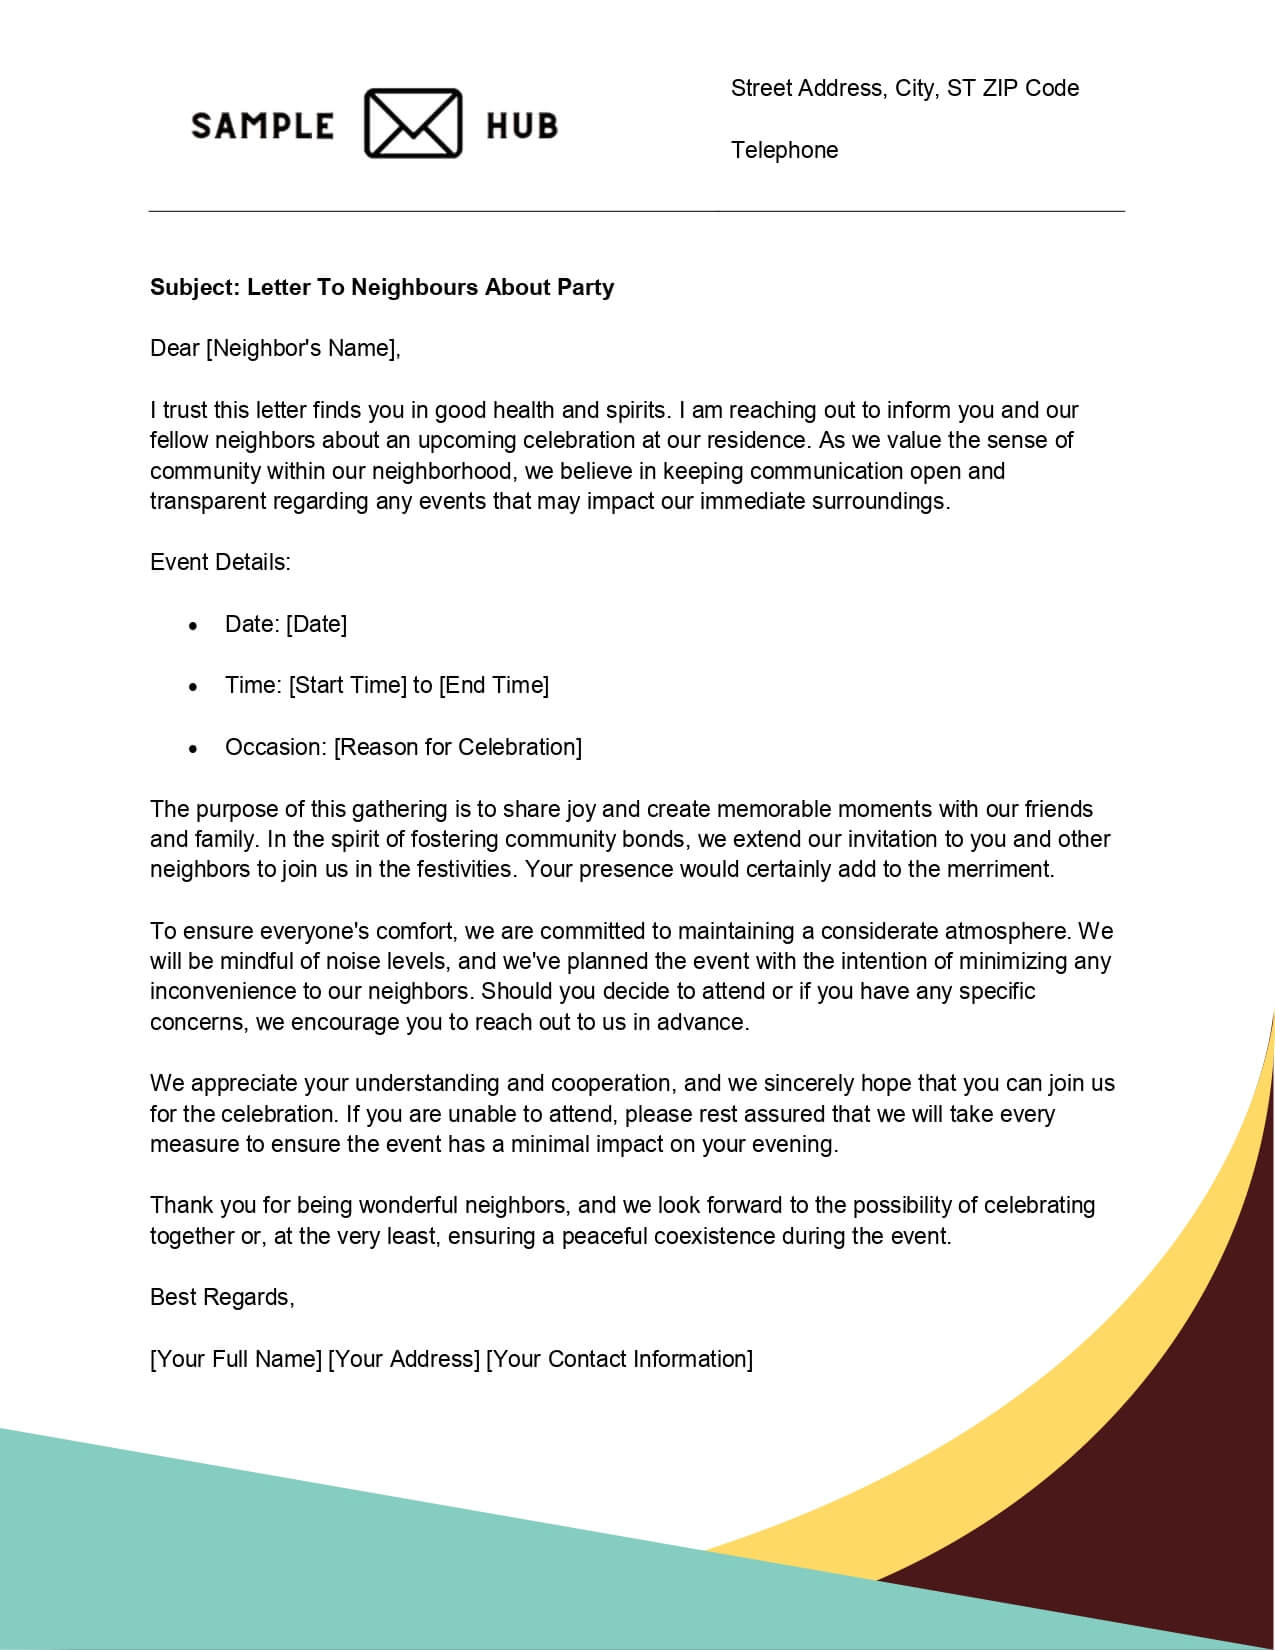 Letter To Neighbours About Party